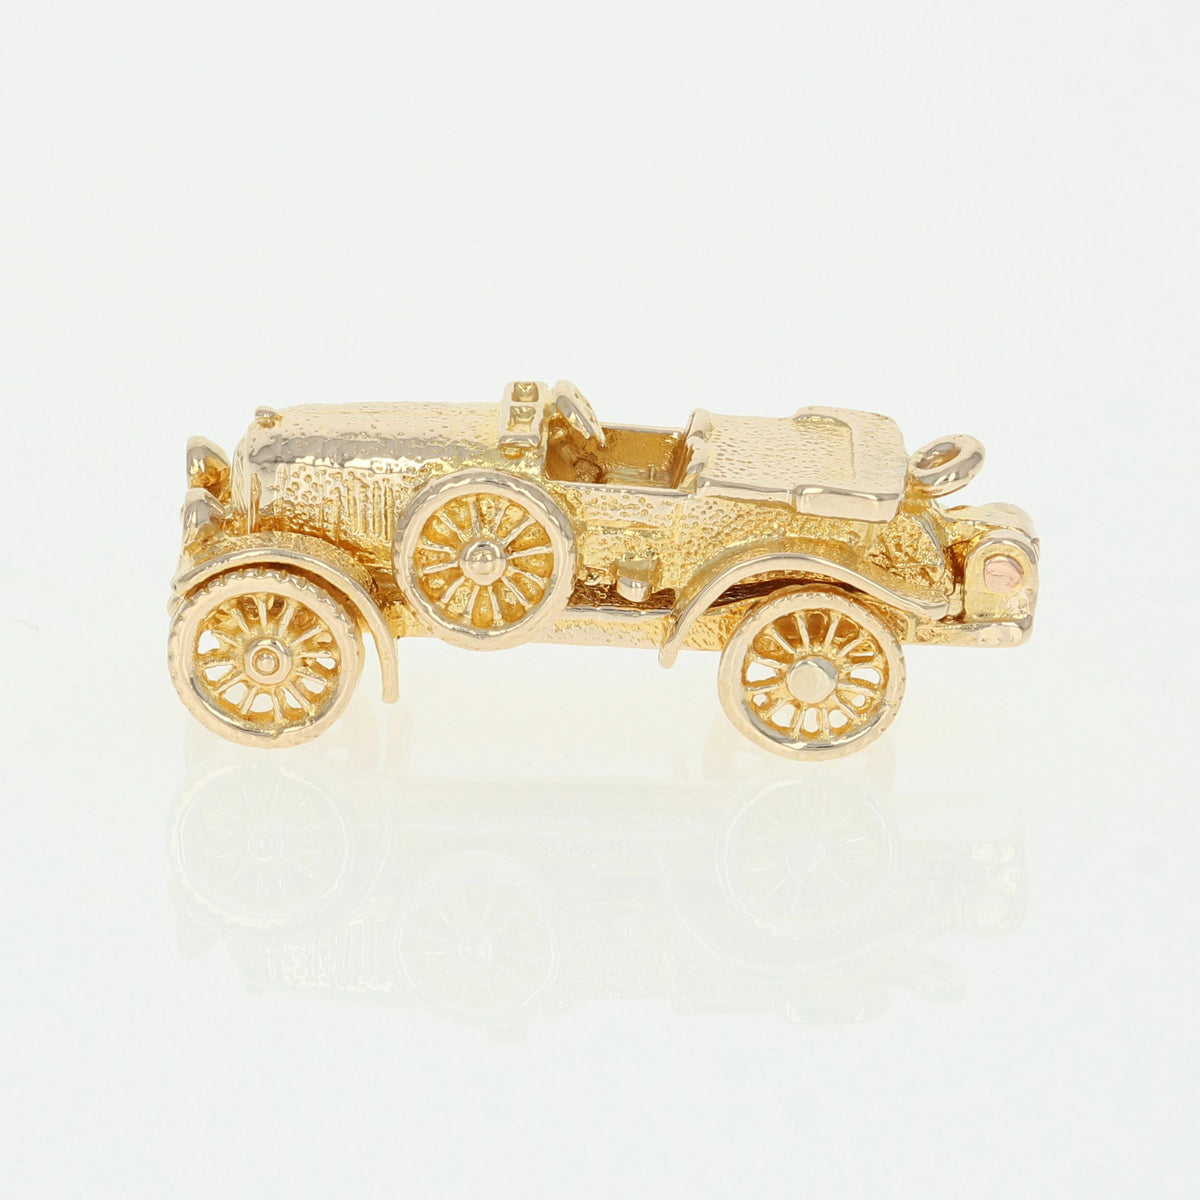 Classic Automobile Charm - 9k Yellow Gold Opens Car's Wheels Move